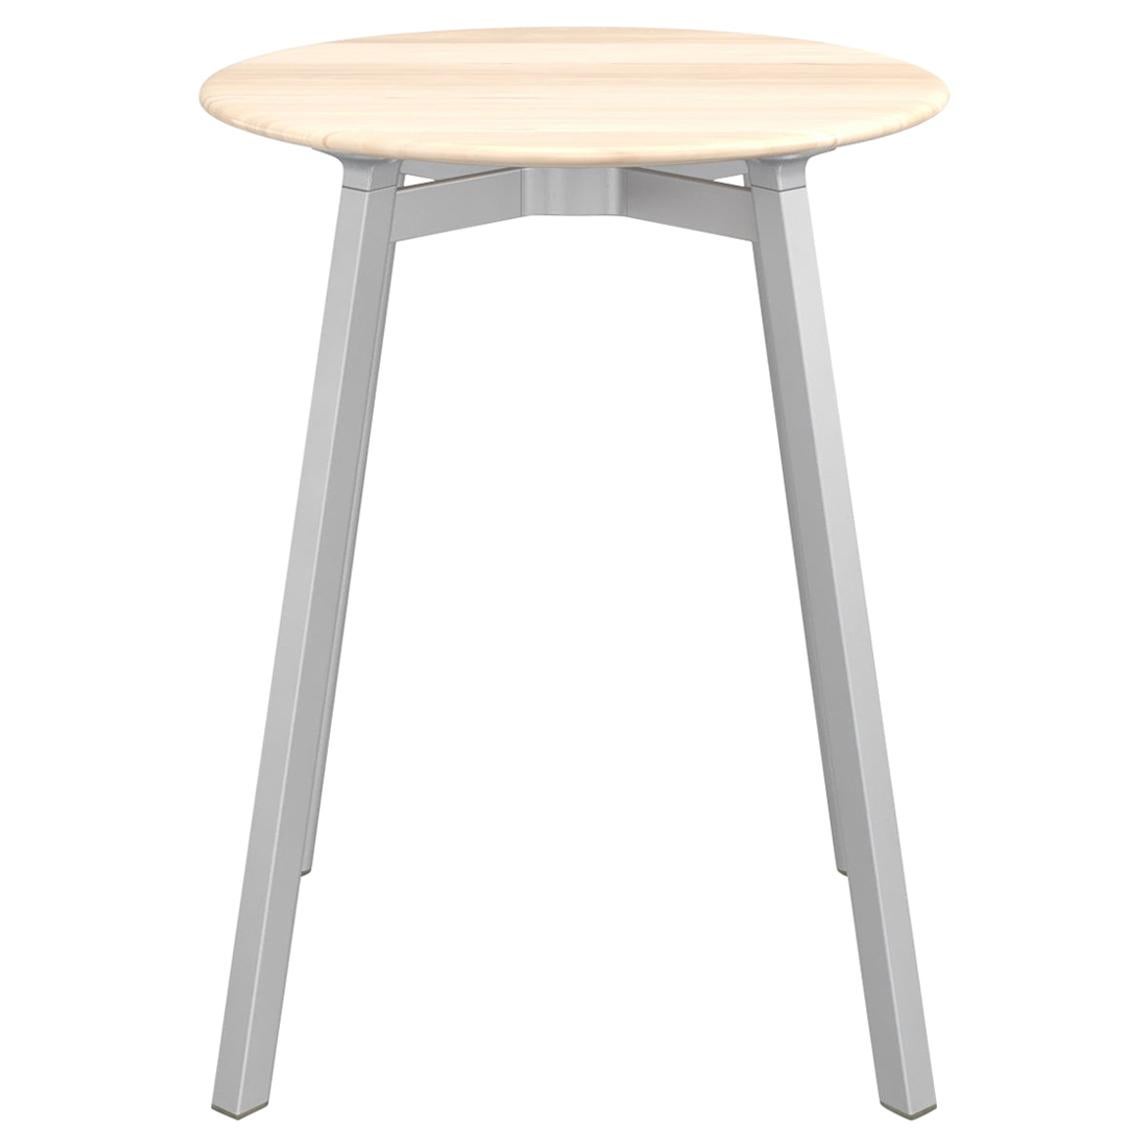 Emeco Su Small Round Cafe Table with Anodized Aluminum Frame & Wood Top by Nendo